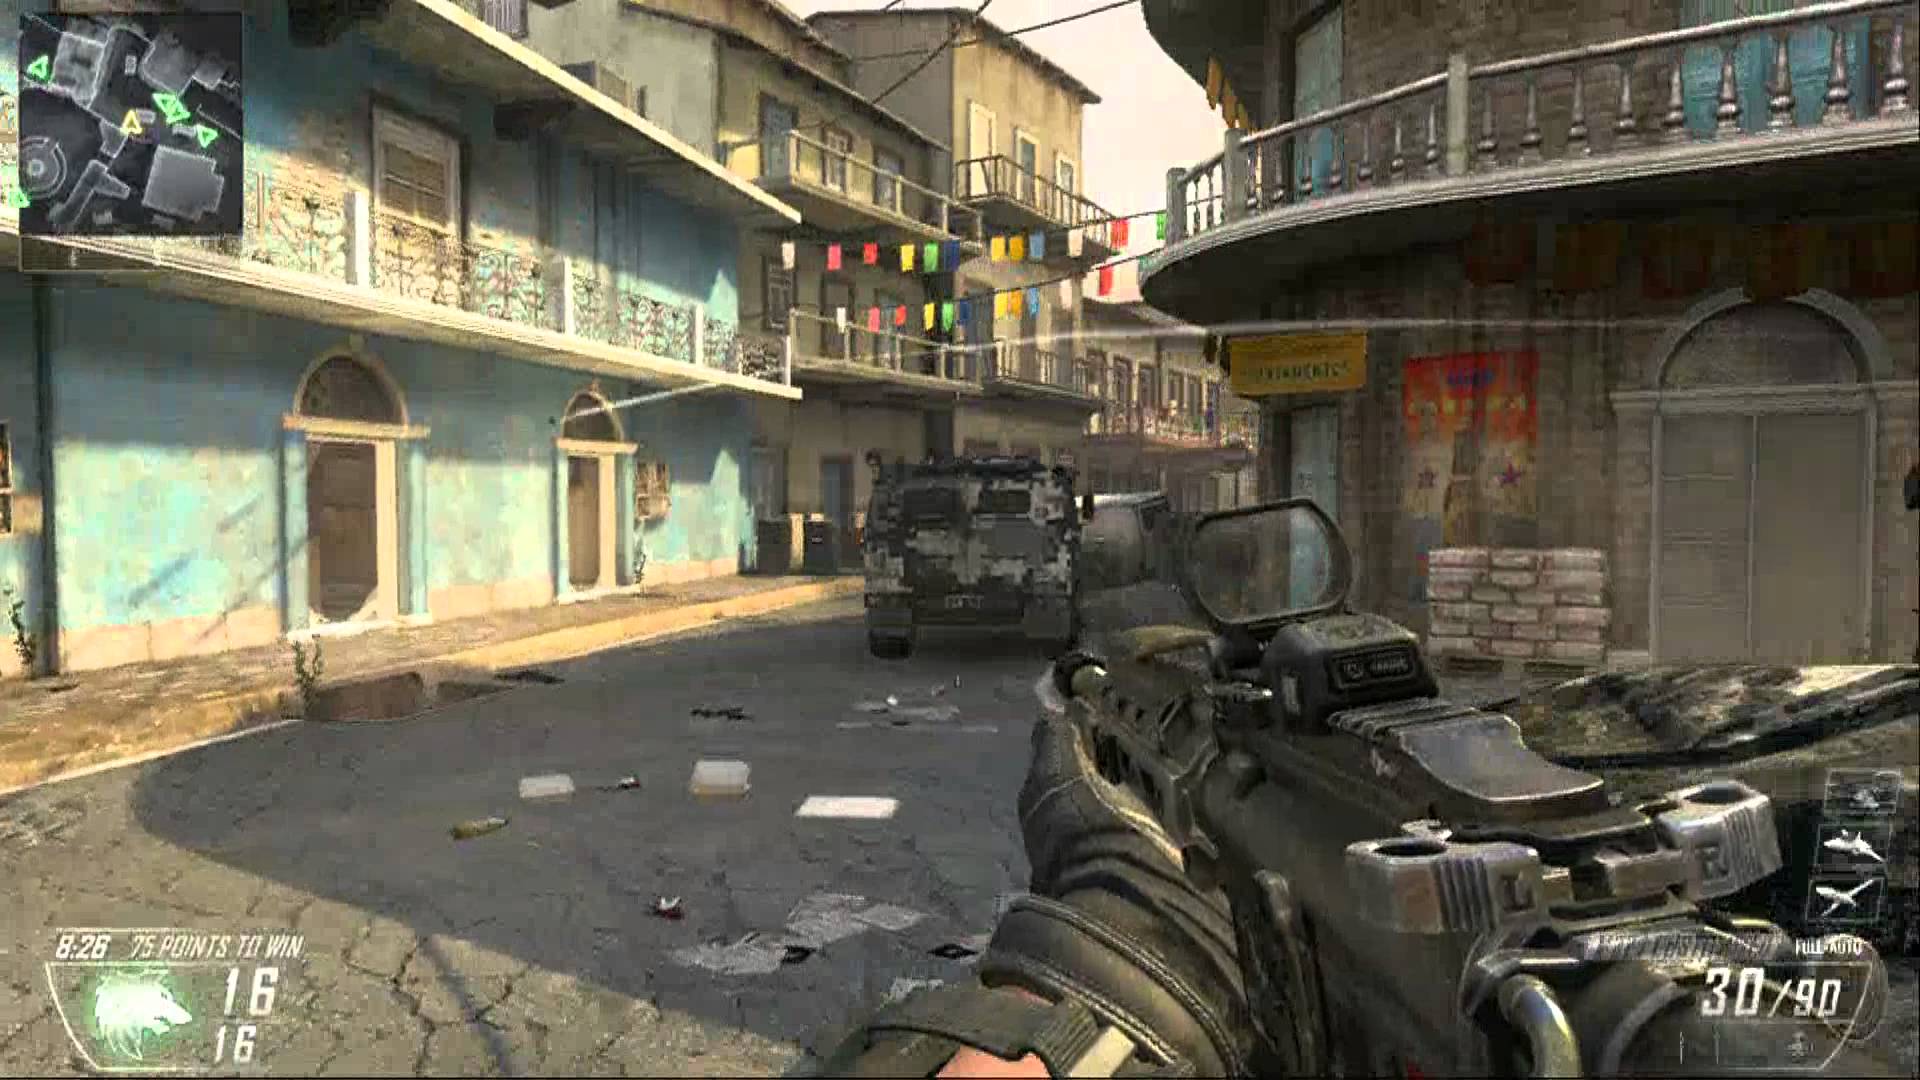 This is black ops 2 in 2020. 